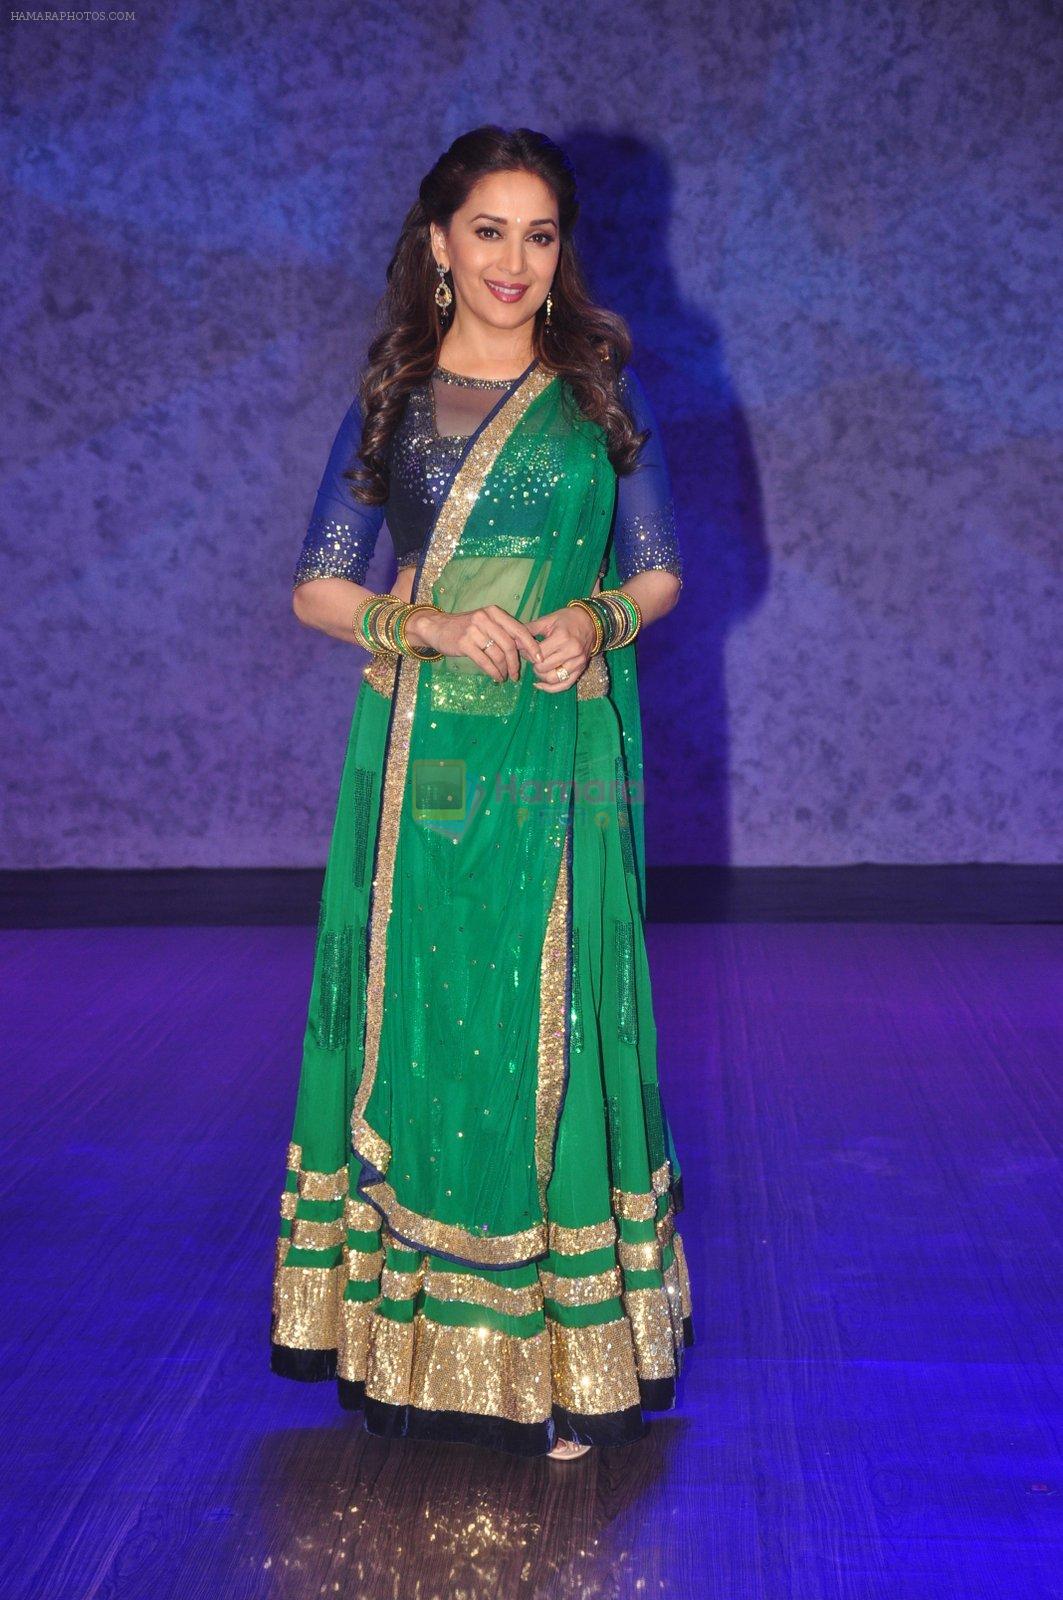 Madhuri Dixit shoots for her dance app on 4th Nov 2015